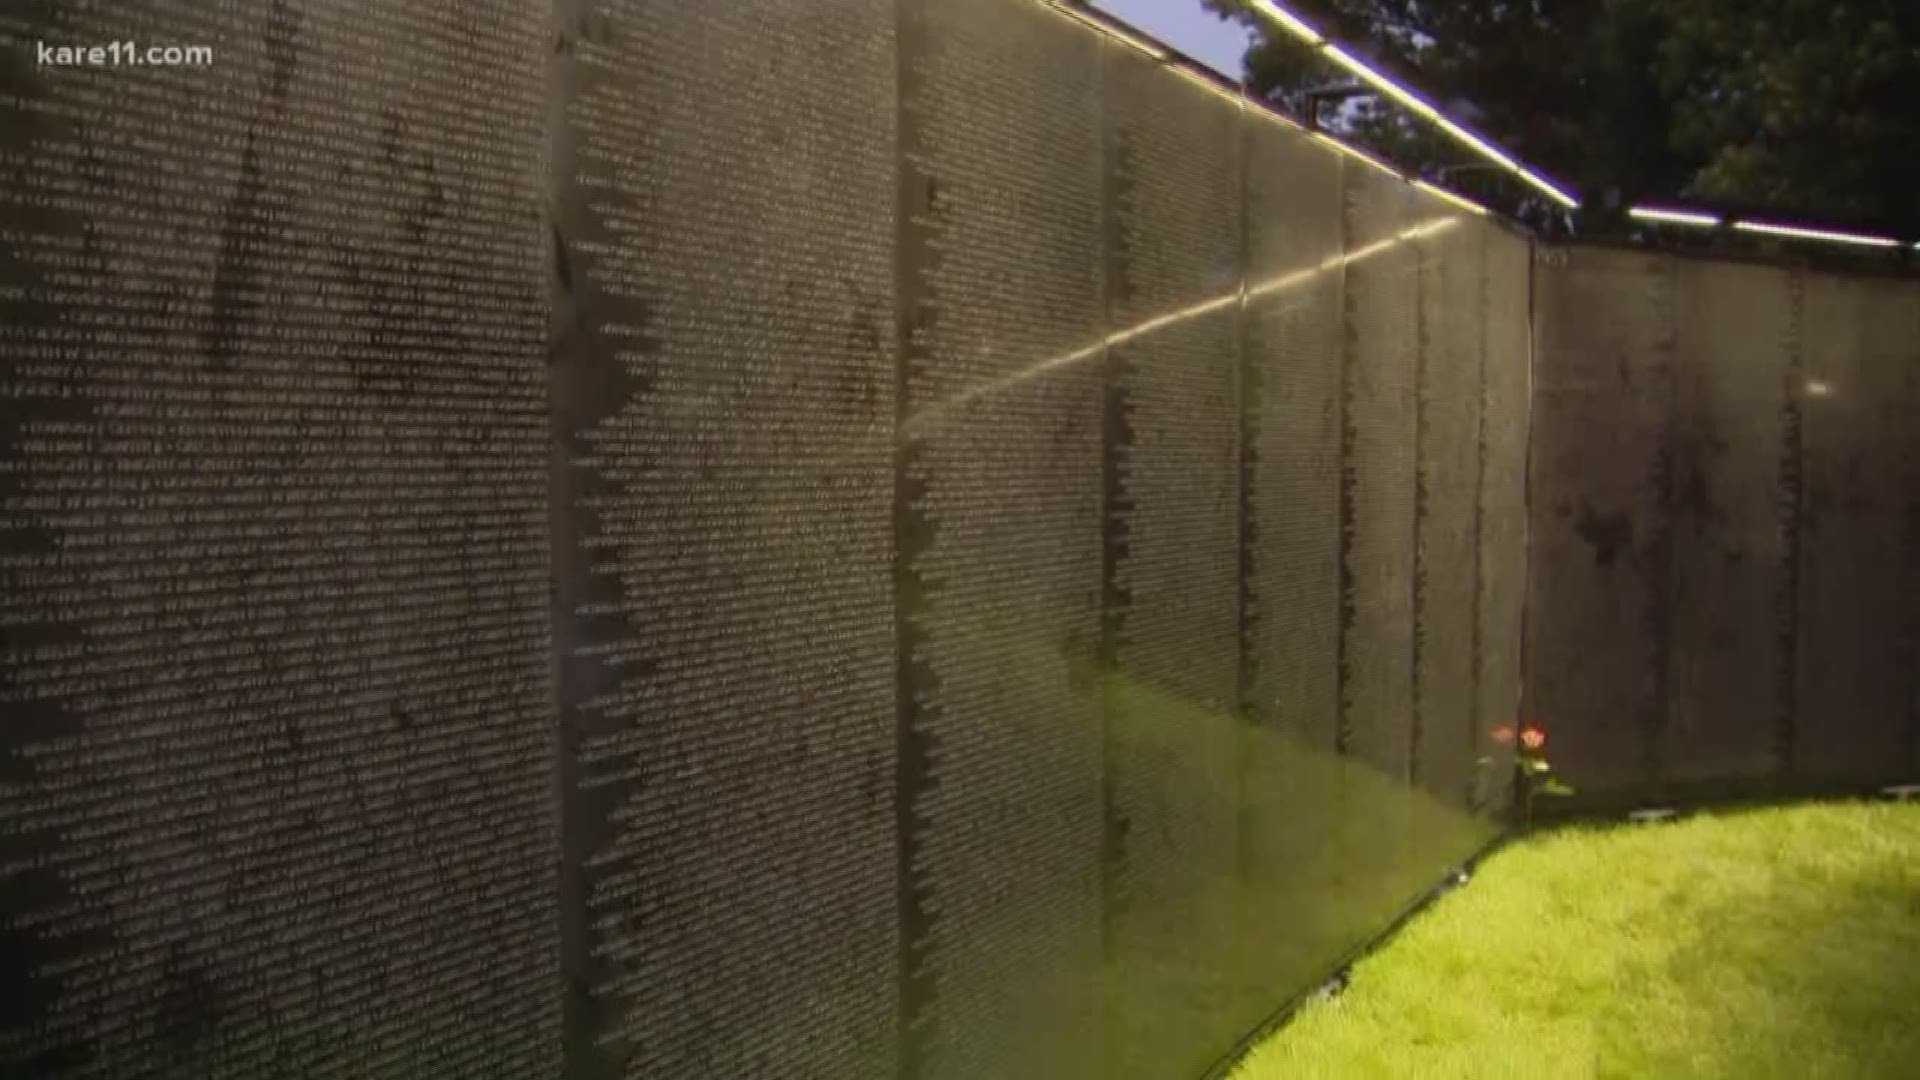 The Wall That Heals, a replica of the Vietnam Veterans Memorial in Washington, D.C., will be set up at the Minnesota State Capitol grounds from June 21-24. https://kare11.tv/2IbkoZ5